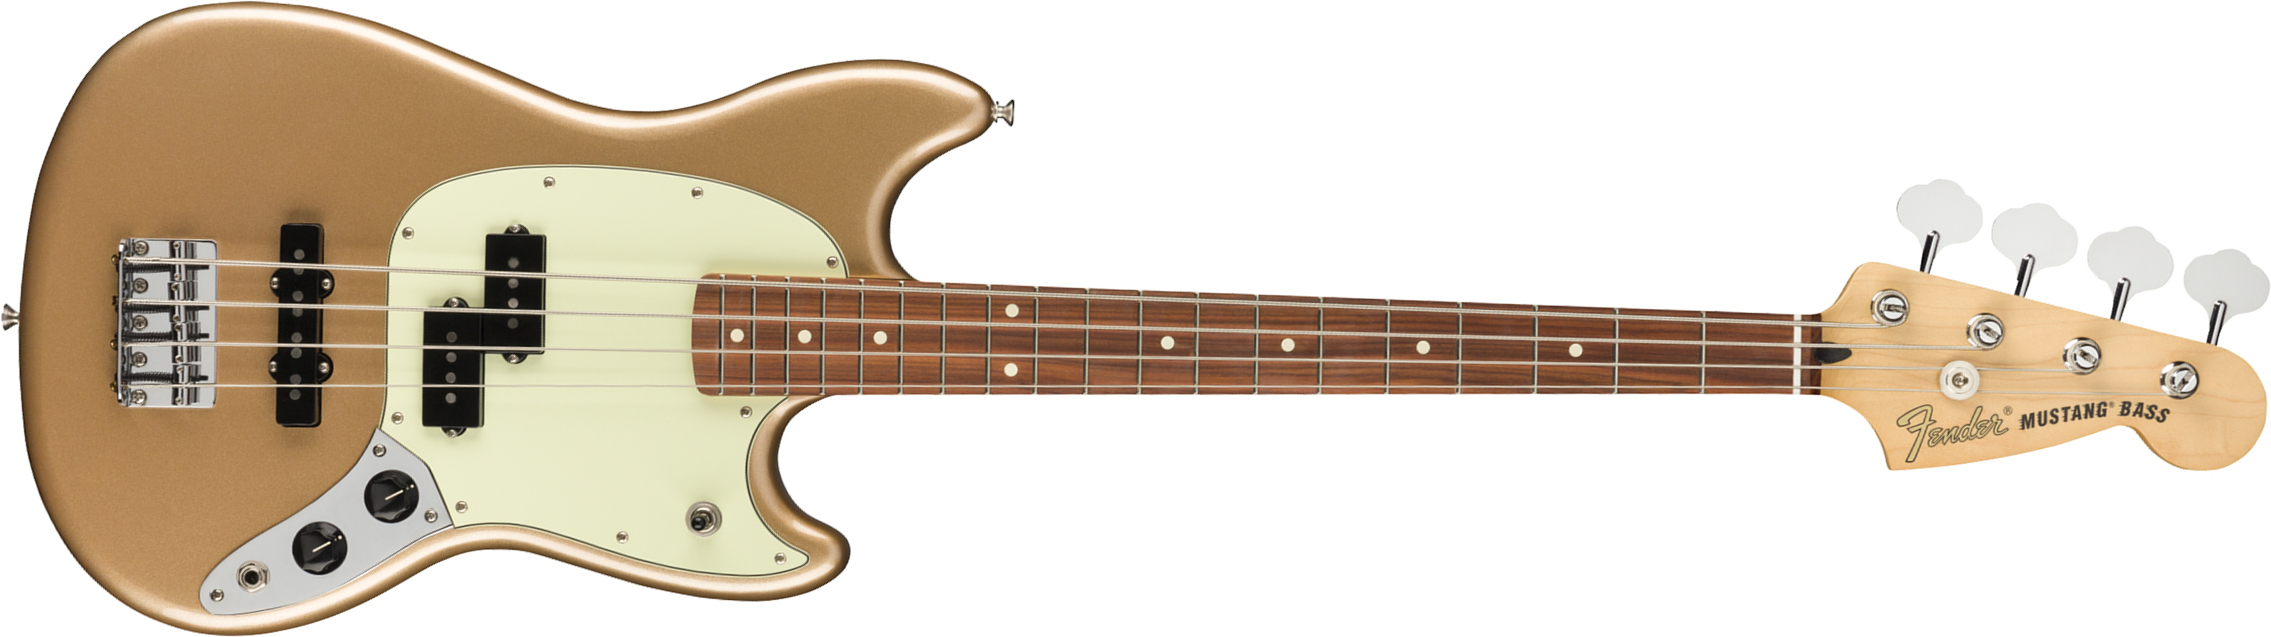 Fender Player Mustang Bass Mex Pf - Firemist Gold - Electric bass for kids - Main picture